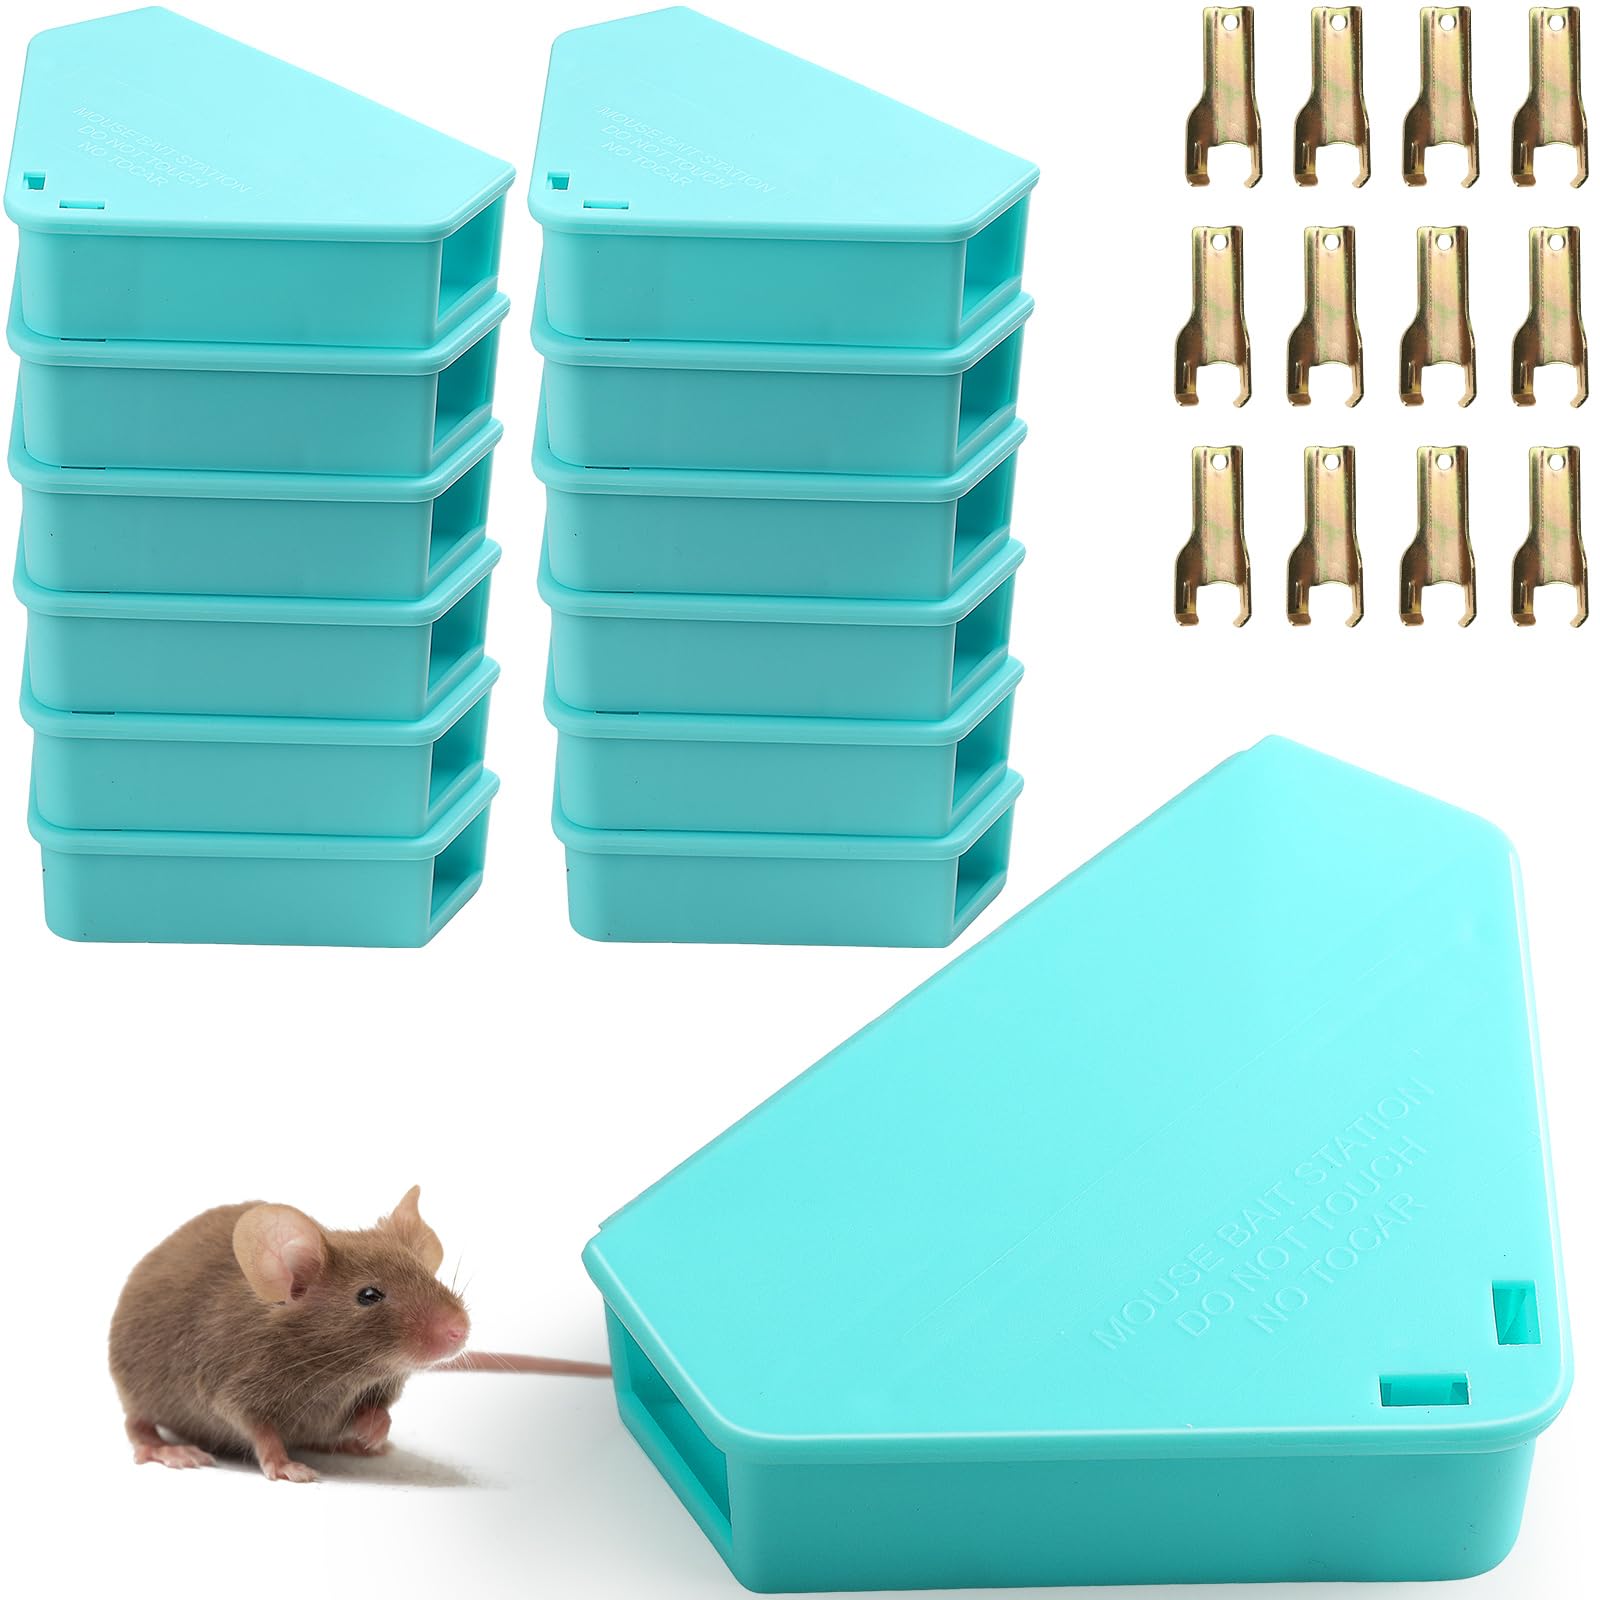 Kittmip 12 Pcs Triangle Mouse Station with Keys, Key Required Mouse Bait Station, Reusable Humane Rodent Box Against Mice Chipmunks Squirrels for Kitchen Living Room Office Warehouse (Blue)